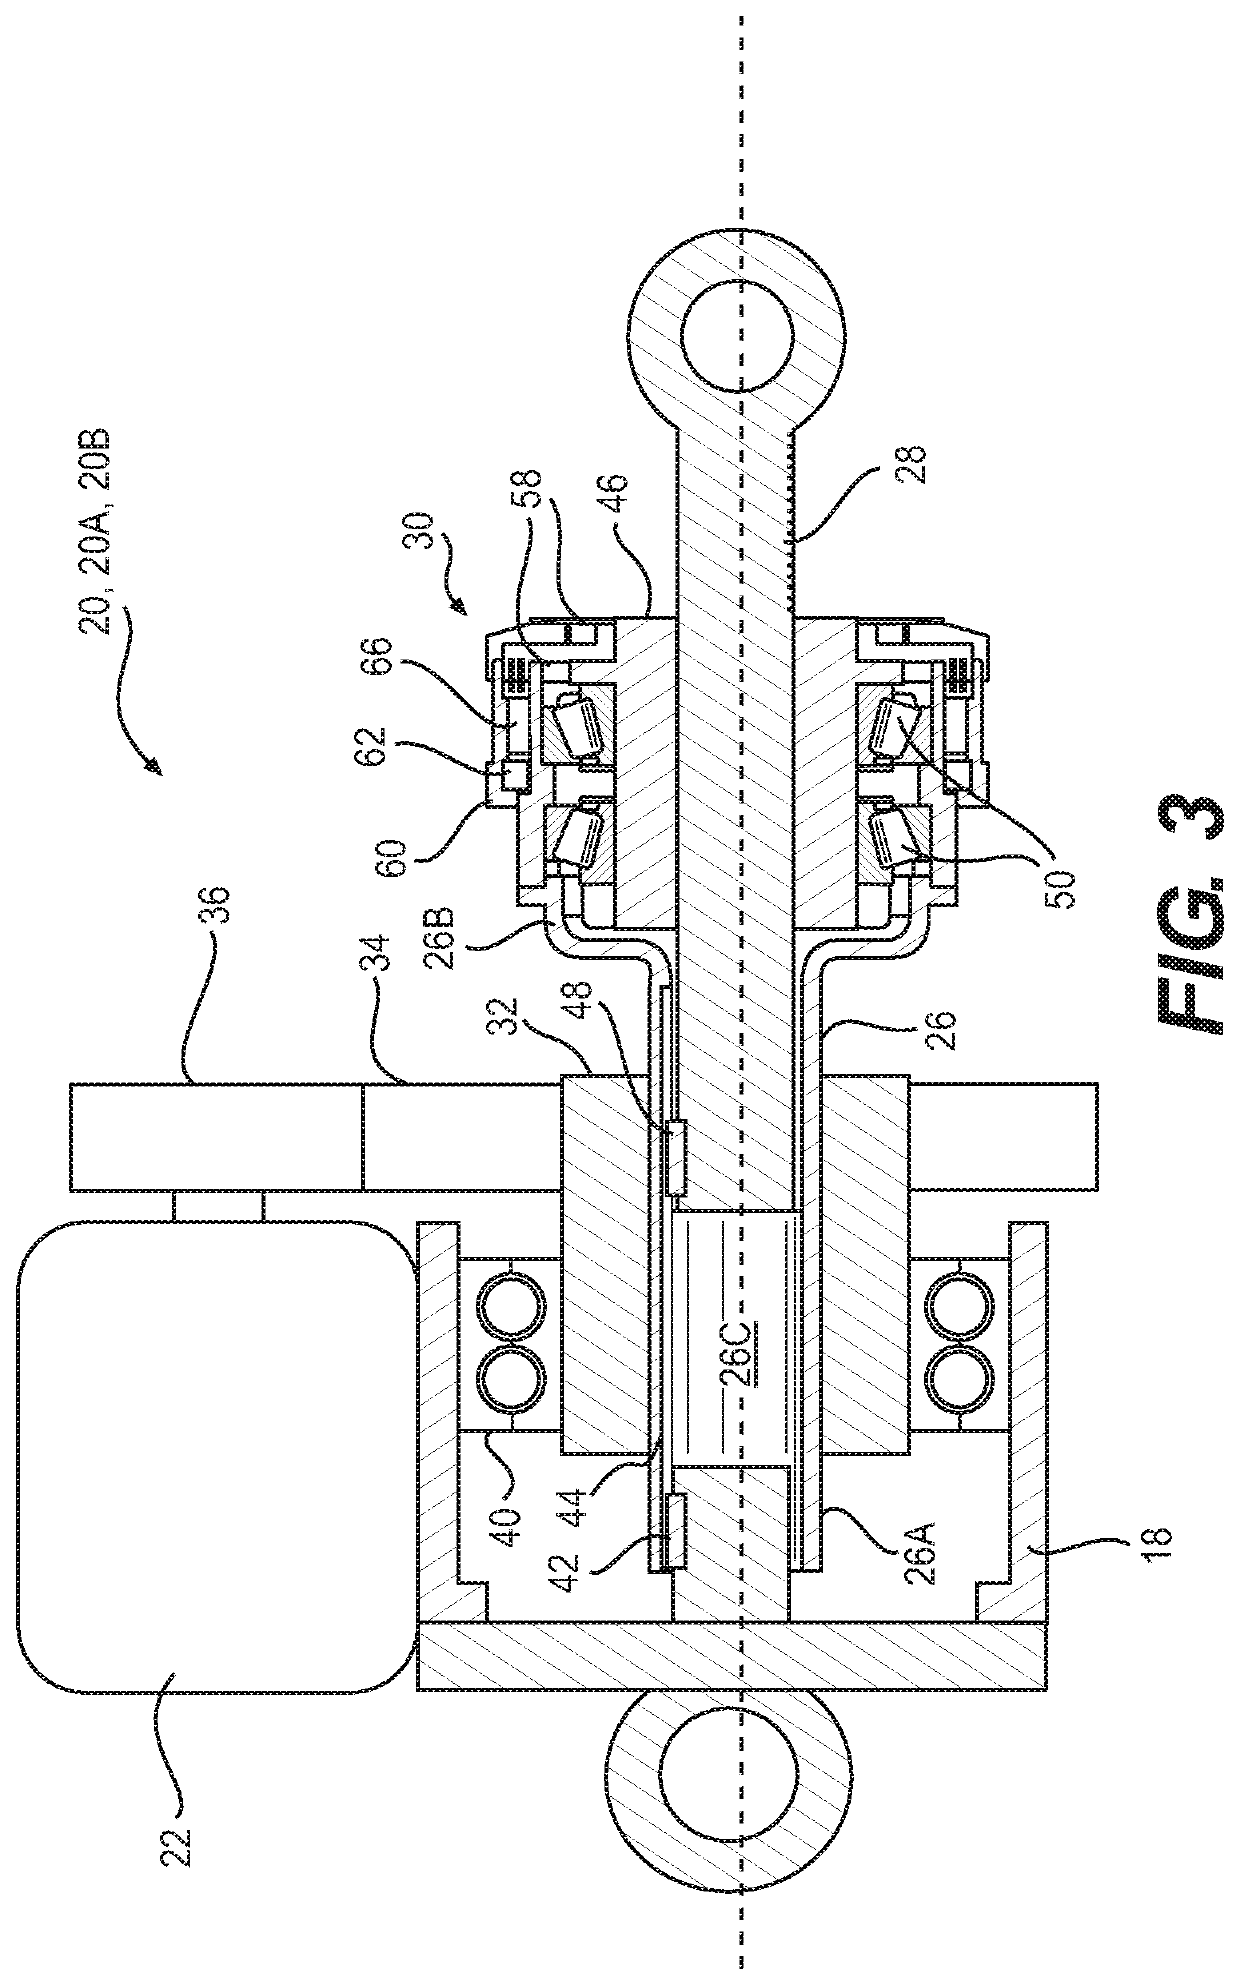 Actuators and methods for aircraft flight control surfaces